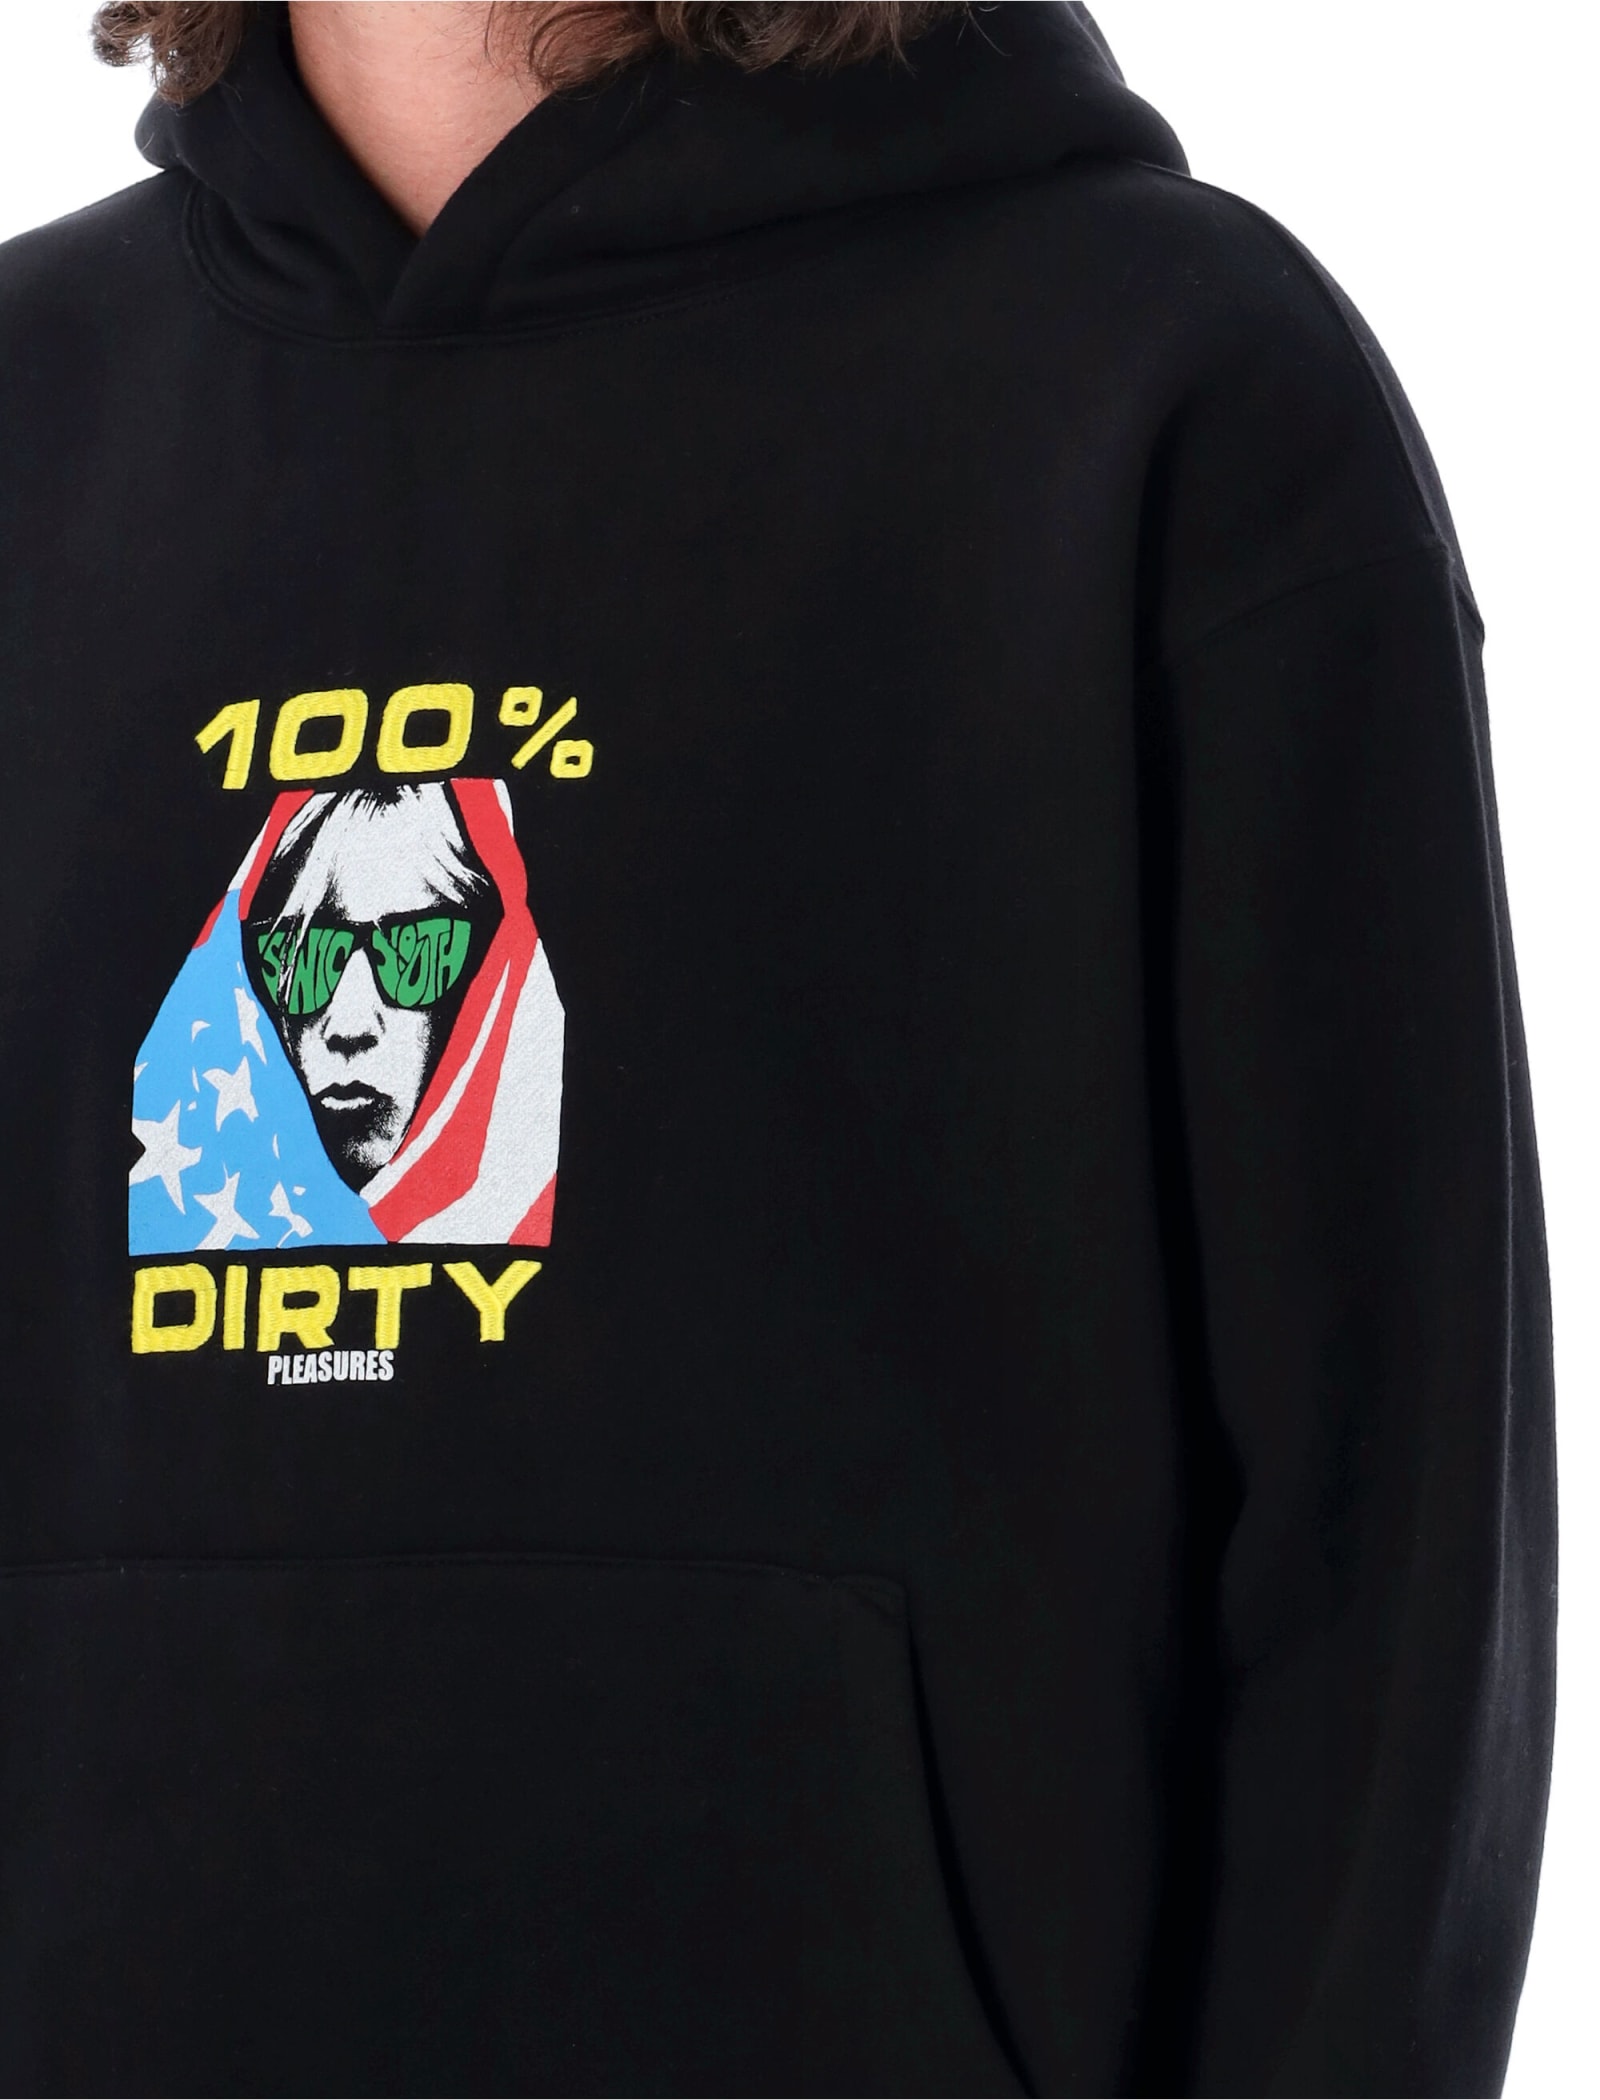 Pleasures Dirty Graphic-print Cotton Blend Hoodie in Black for Men